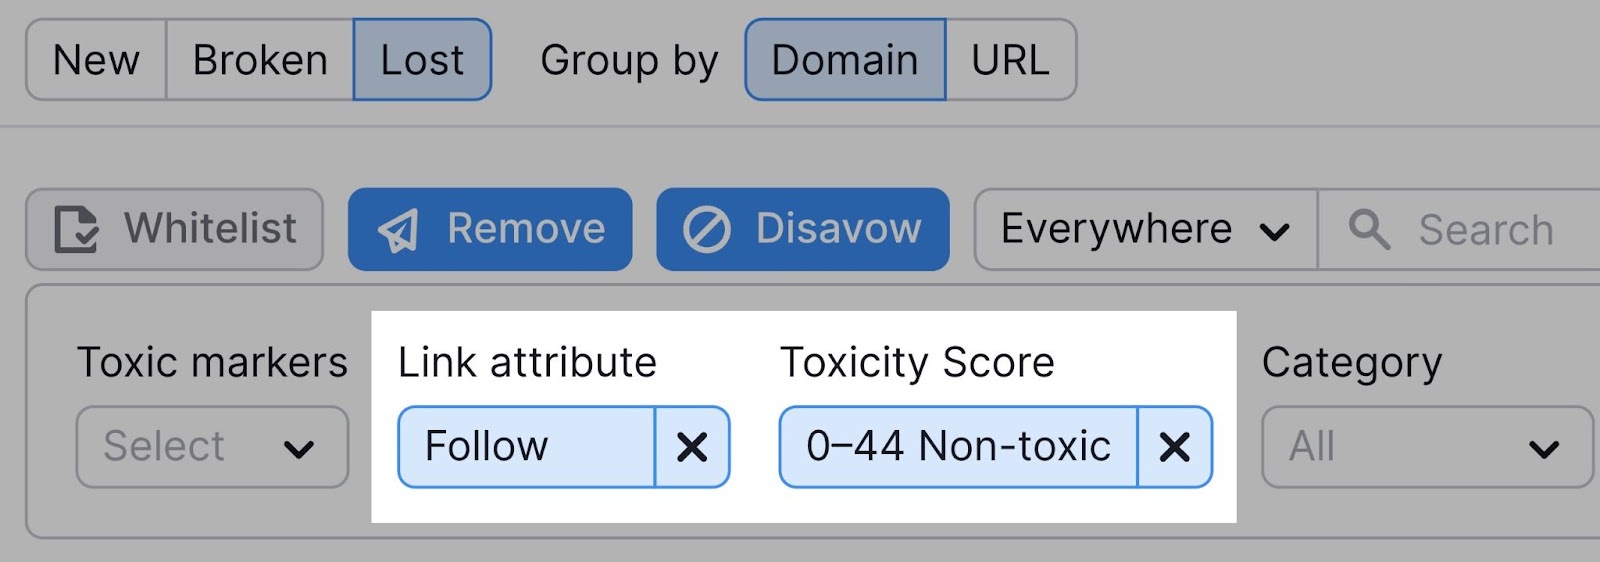 filtering the database  to amusement   travel  links with debased  toxicity scores